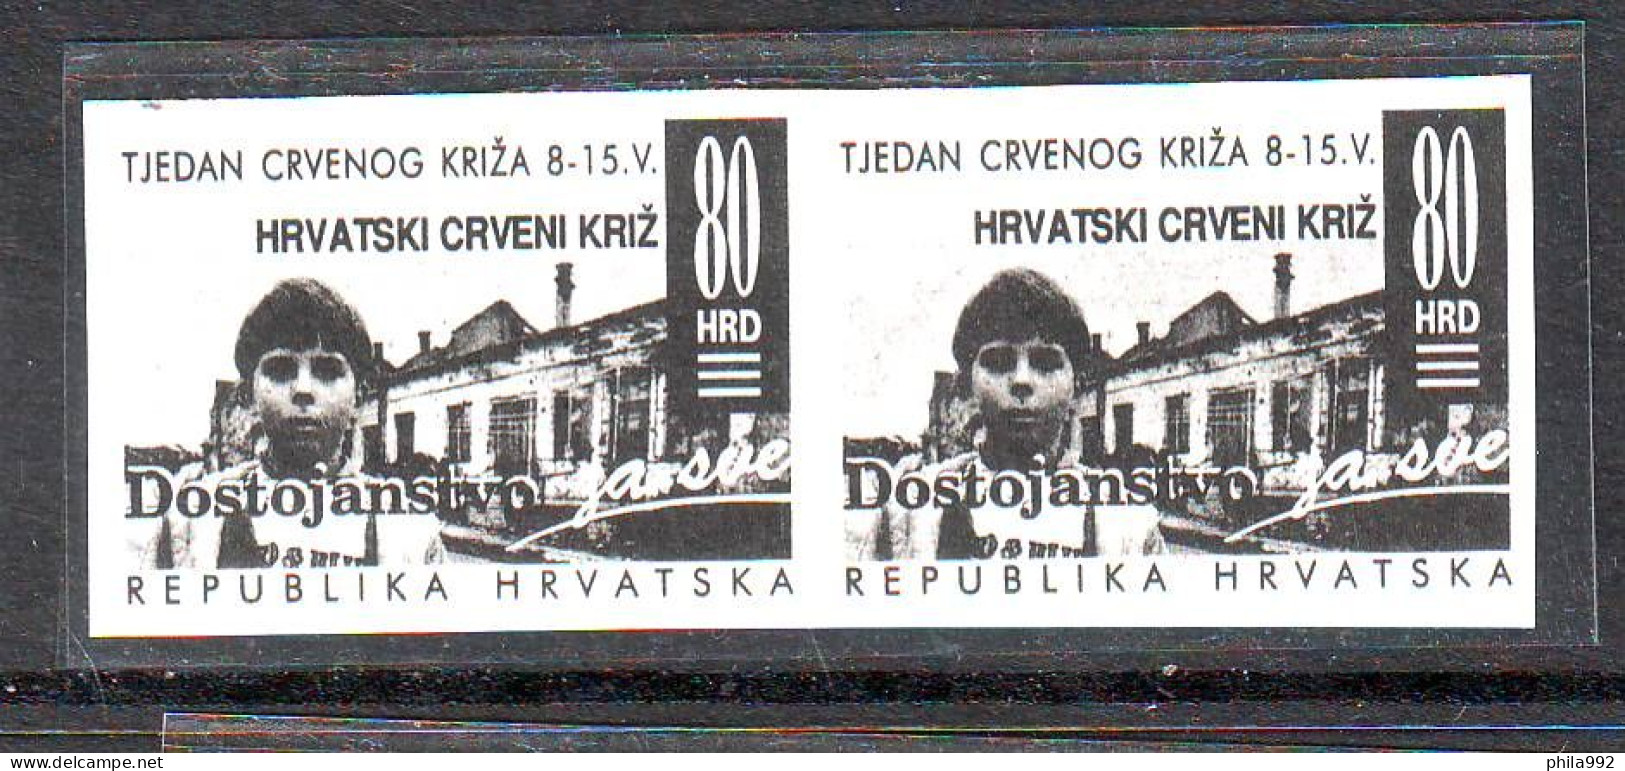 Croatia 1993 Charity Stamp Mi.No. 26 RED CROSS  Imperforate Pair Without Red Color   MNH - Kroatien